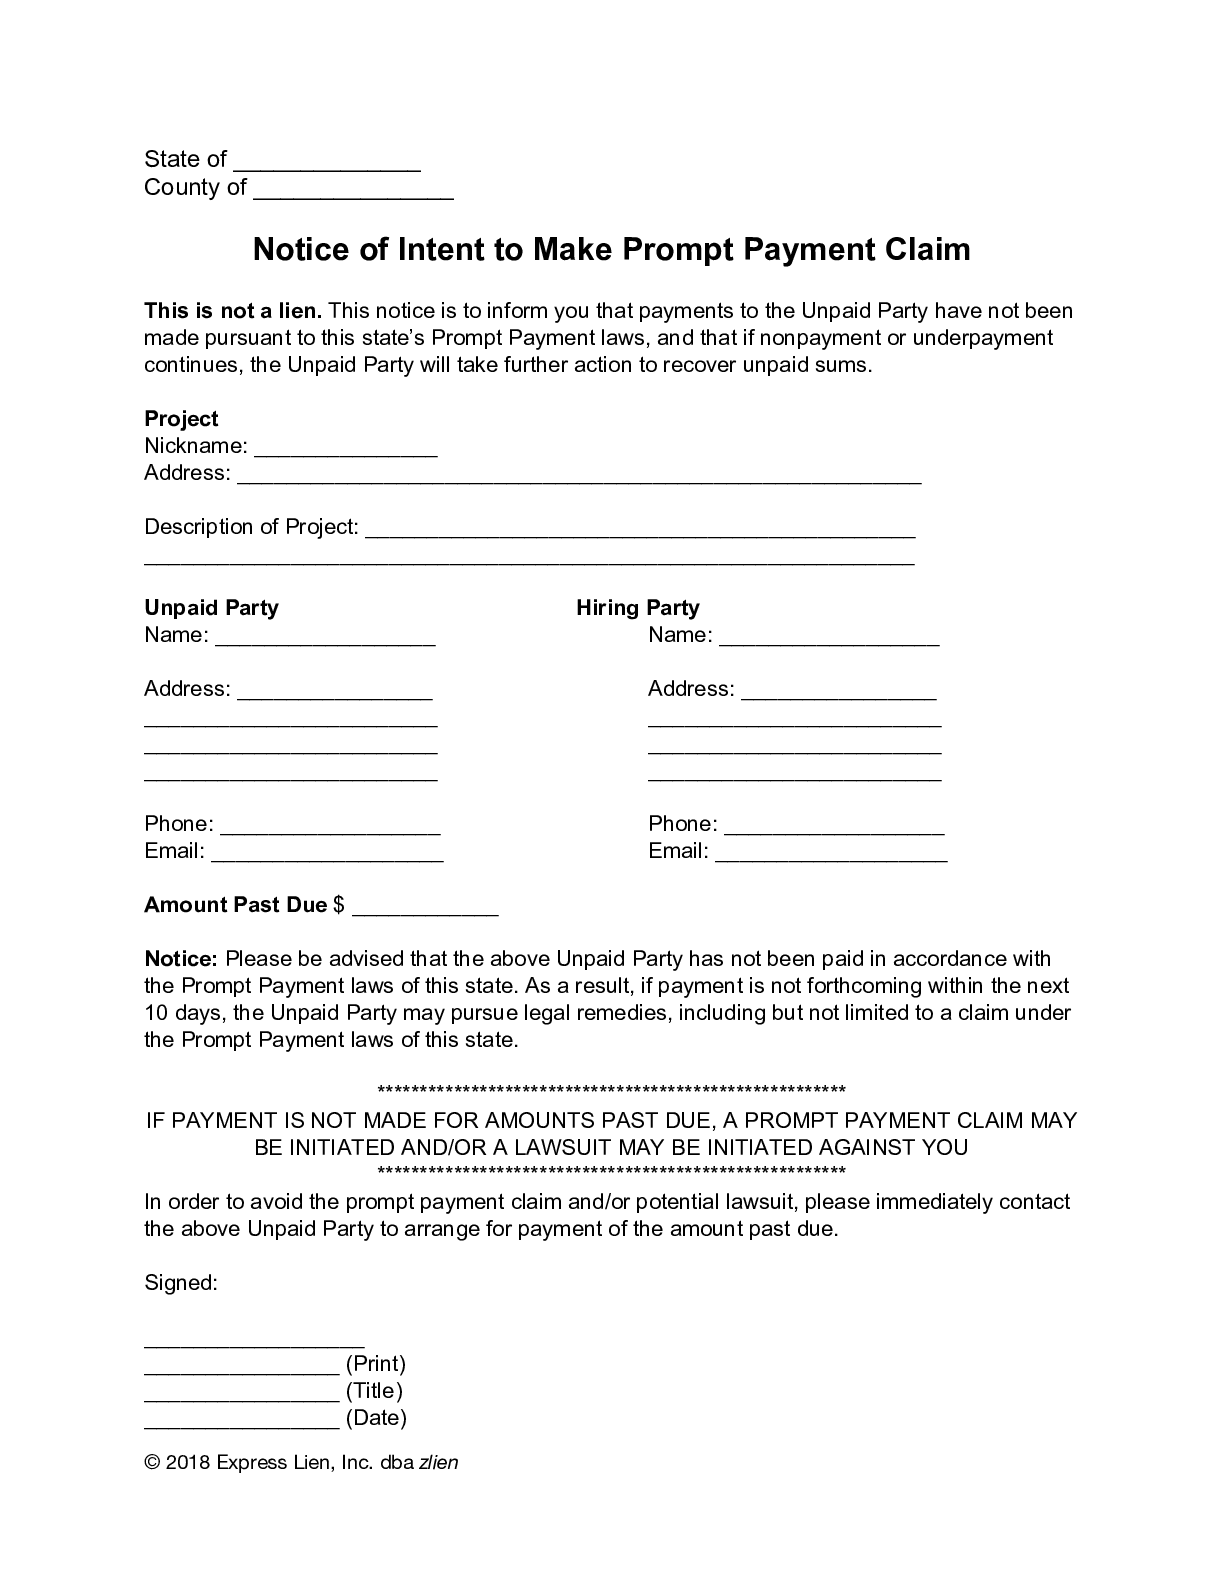 Notice of Intent to Make Prompt Payment Claim Form - free from